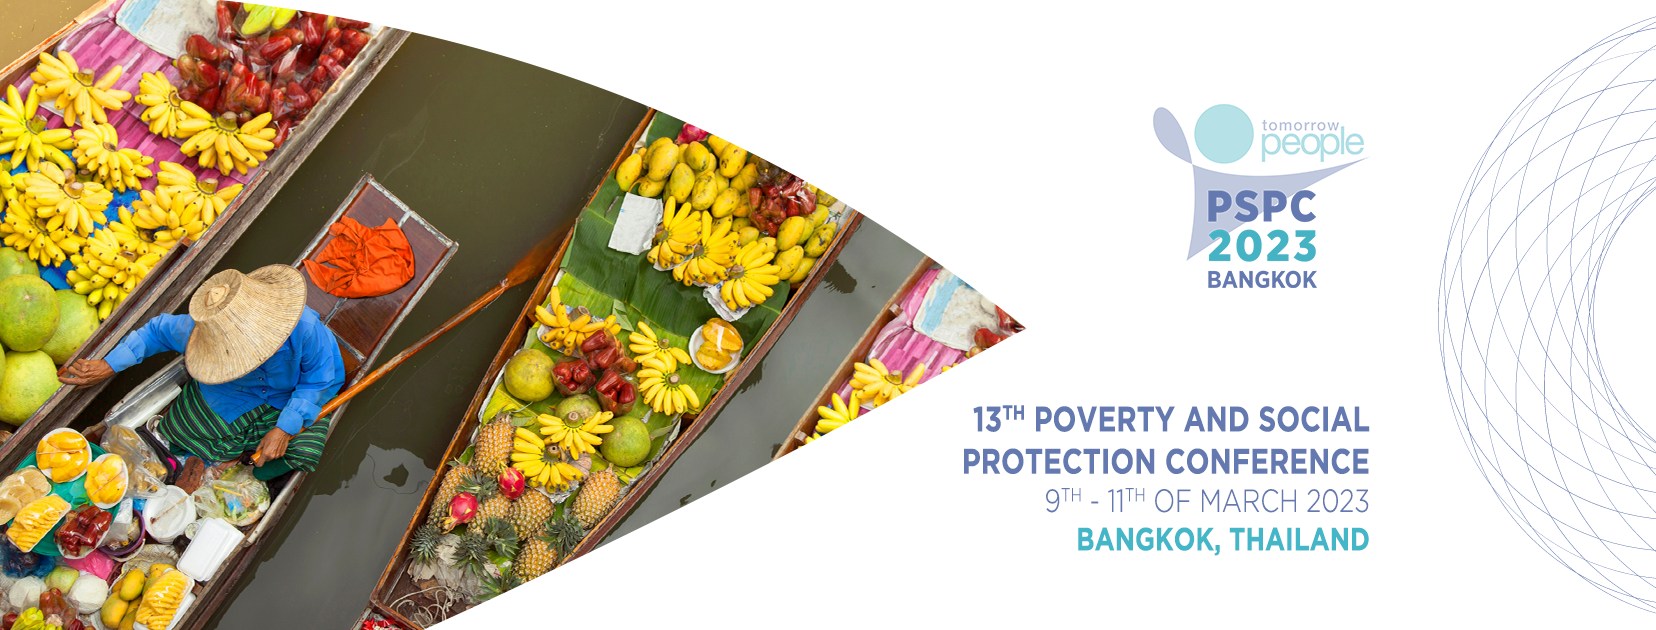 13th Poverty and Social Protection Conference [PSPC2023], Bangkok, Thailand